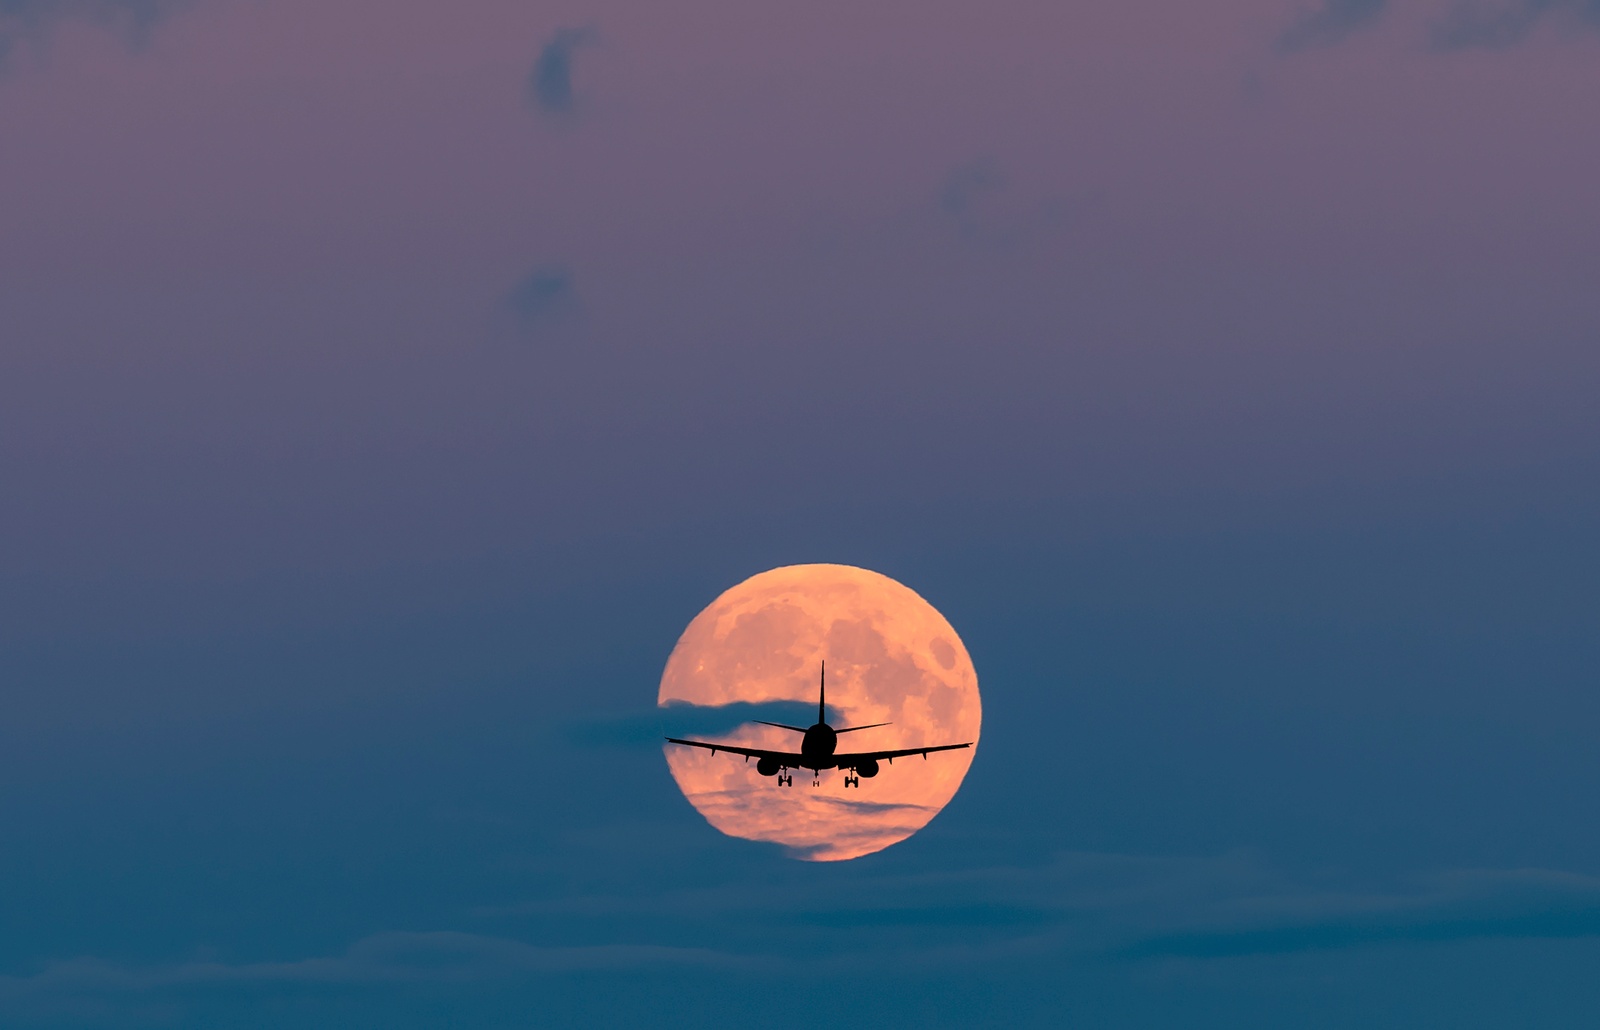 IATA lauds India’s Moon mission for minimal disruption to commercial aviation